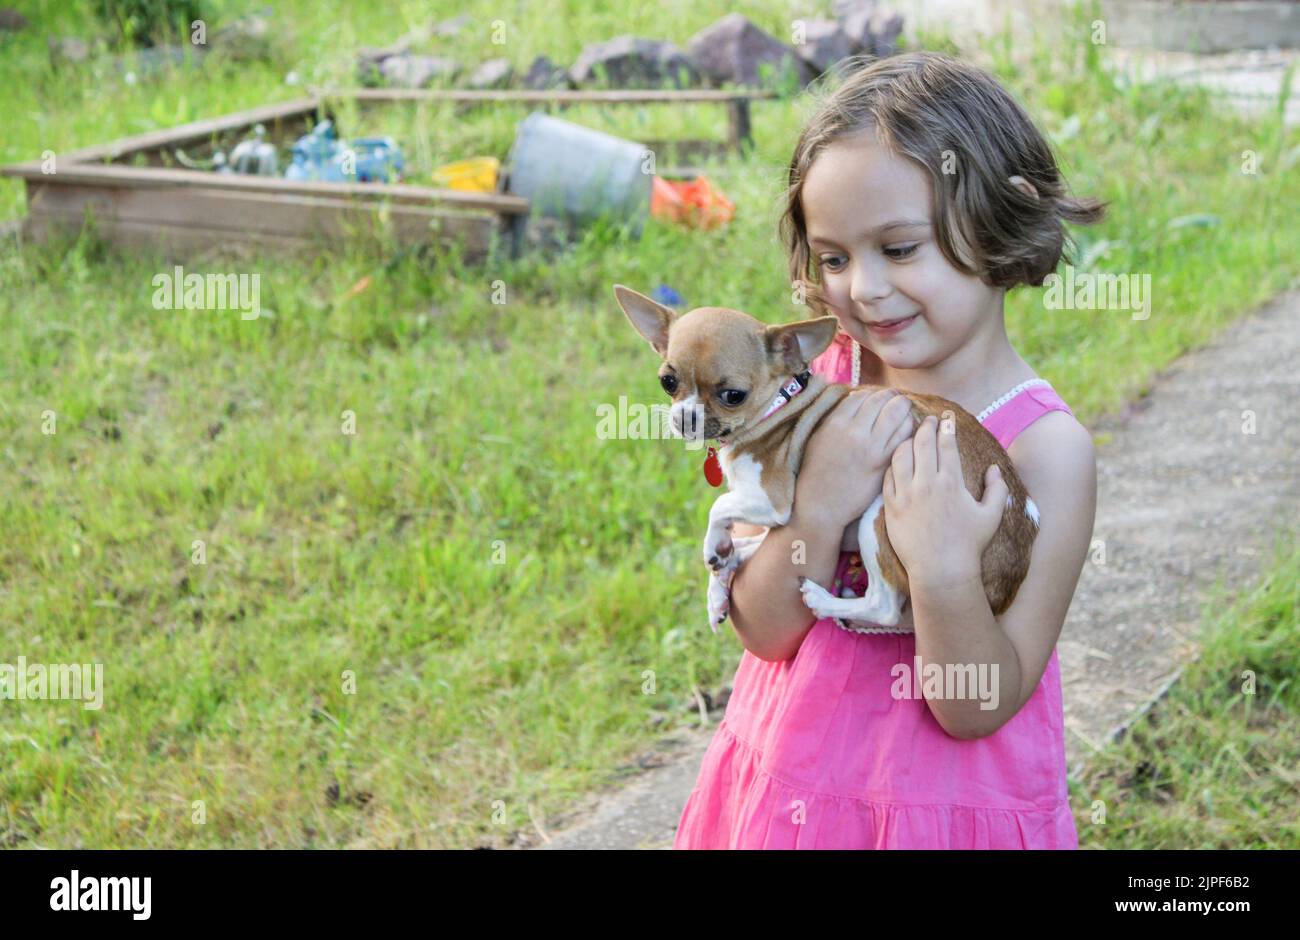 https://c8.alamy.com/comp/2JPF6B2/a-pretty-toddler-girl-holds-a-small-chihuahua-dog-in-her-arms-summer-outdoors-love-care-for-pet-2JPF6B2.jpg